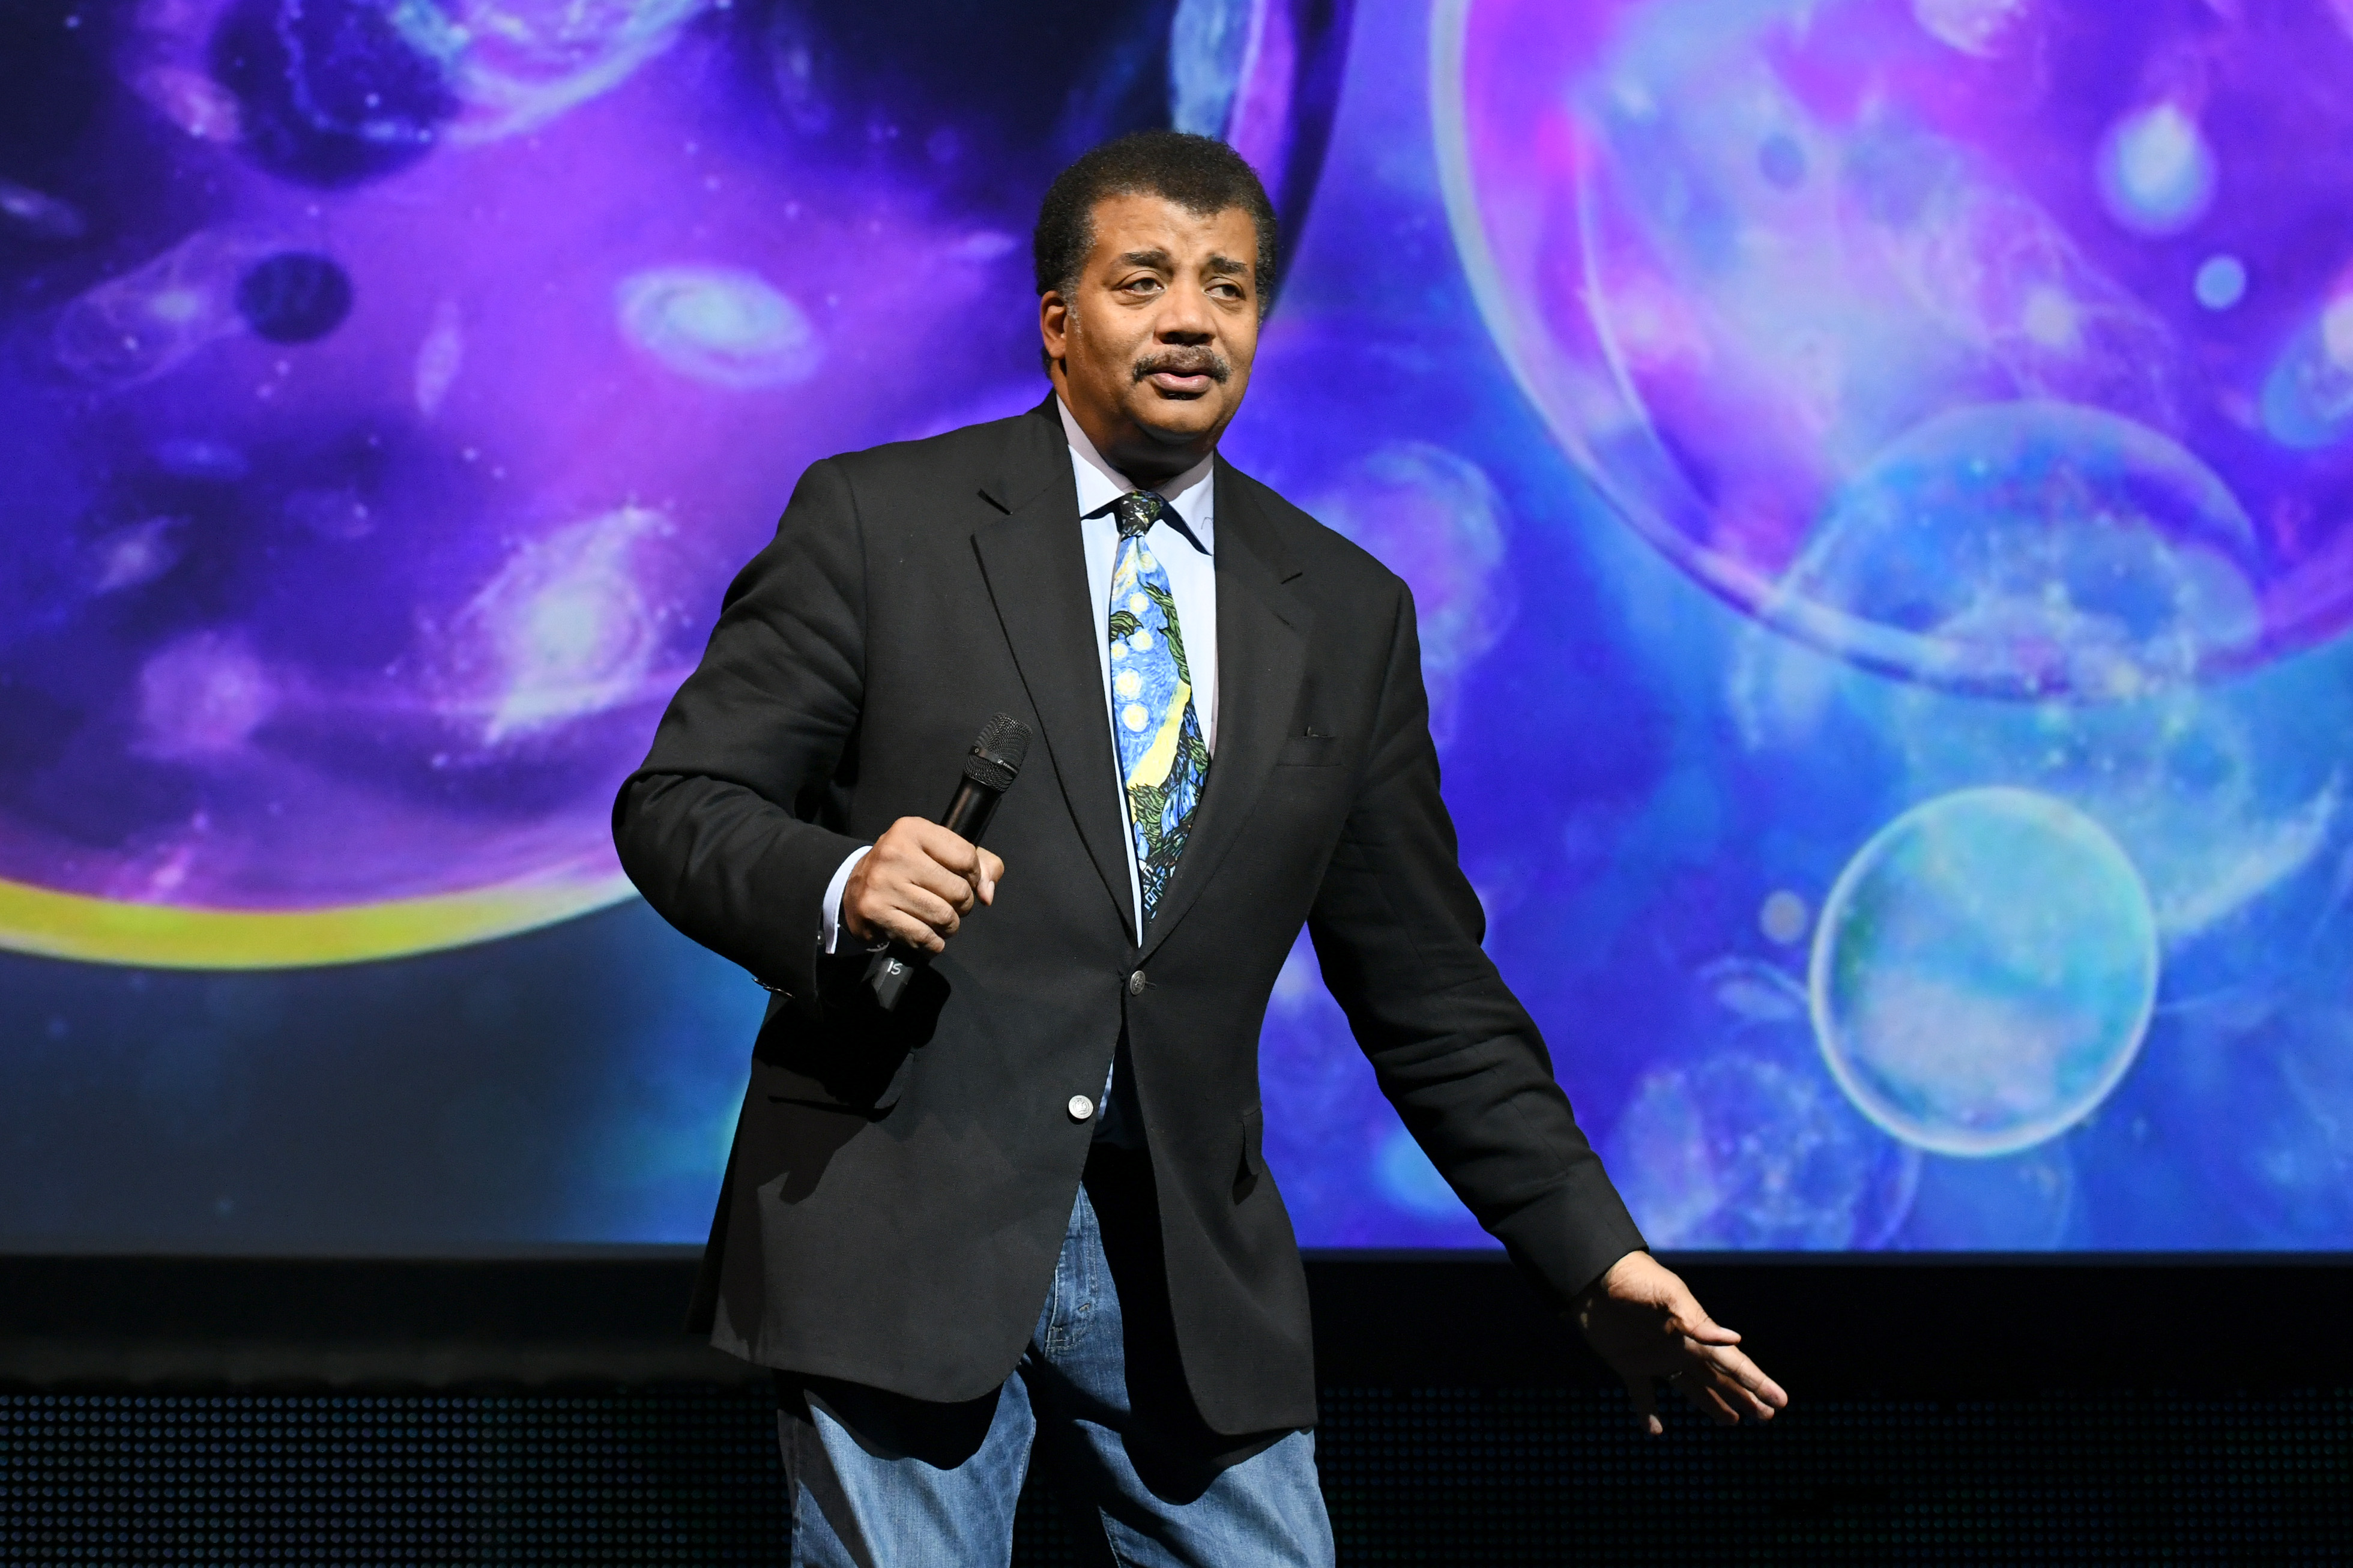 American Astrophysicist Neil deGrasse Tyson speaks onstage during the Onward18 Conference - Day 1 on October 23, 2018 in New York City. (Photo by Craig Barritt/Getty Images for Onward18)